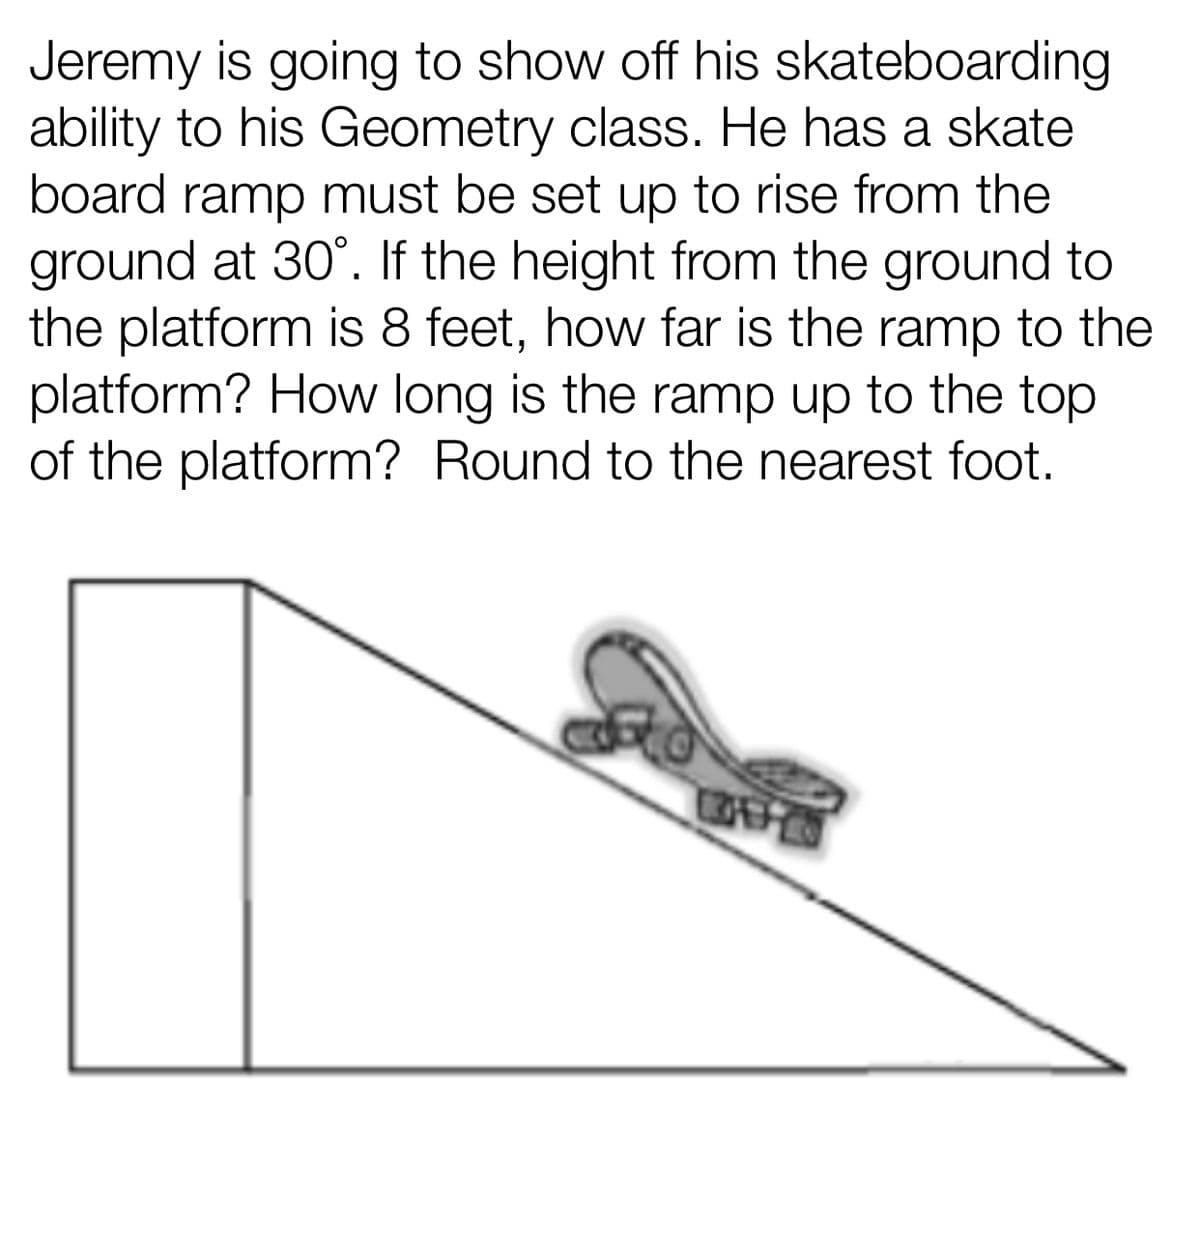 Jeremy is going to show off his skateboarding
ability to his Geometry class. He has a skate
board ramp must be set up to rise from the
ground at 30°. If the height from the ground to
the platform is 8 feet, how far is the ramp to the
platform? How long is the ramp up to the top
of the platform? Round to the nearest foot.
